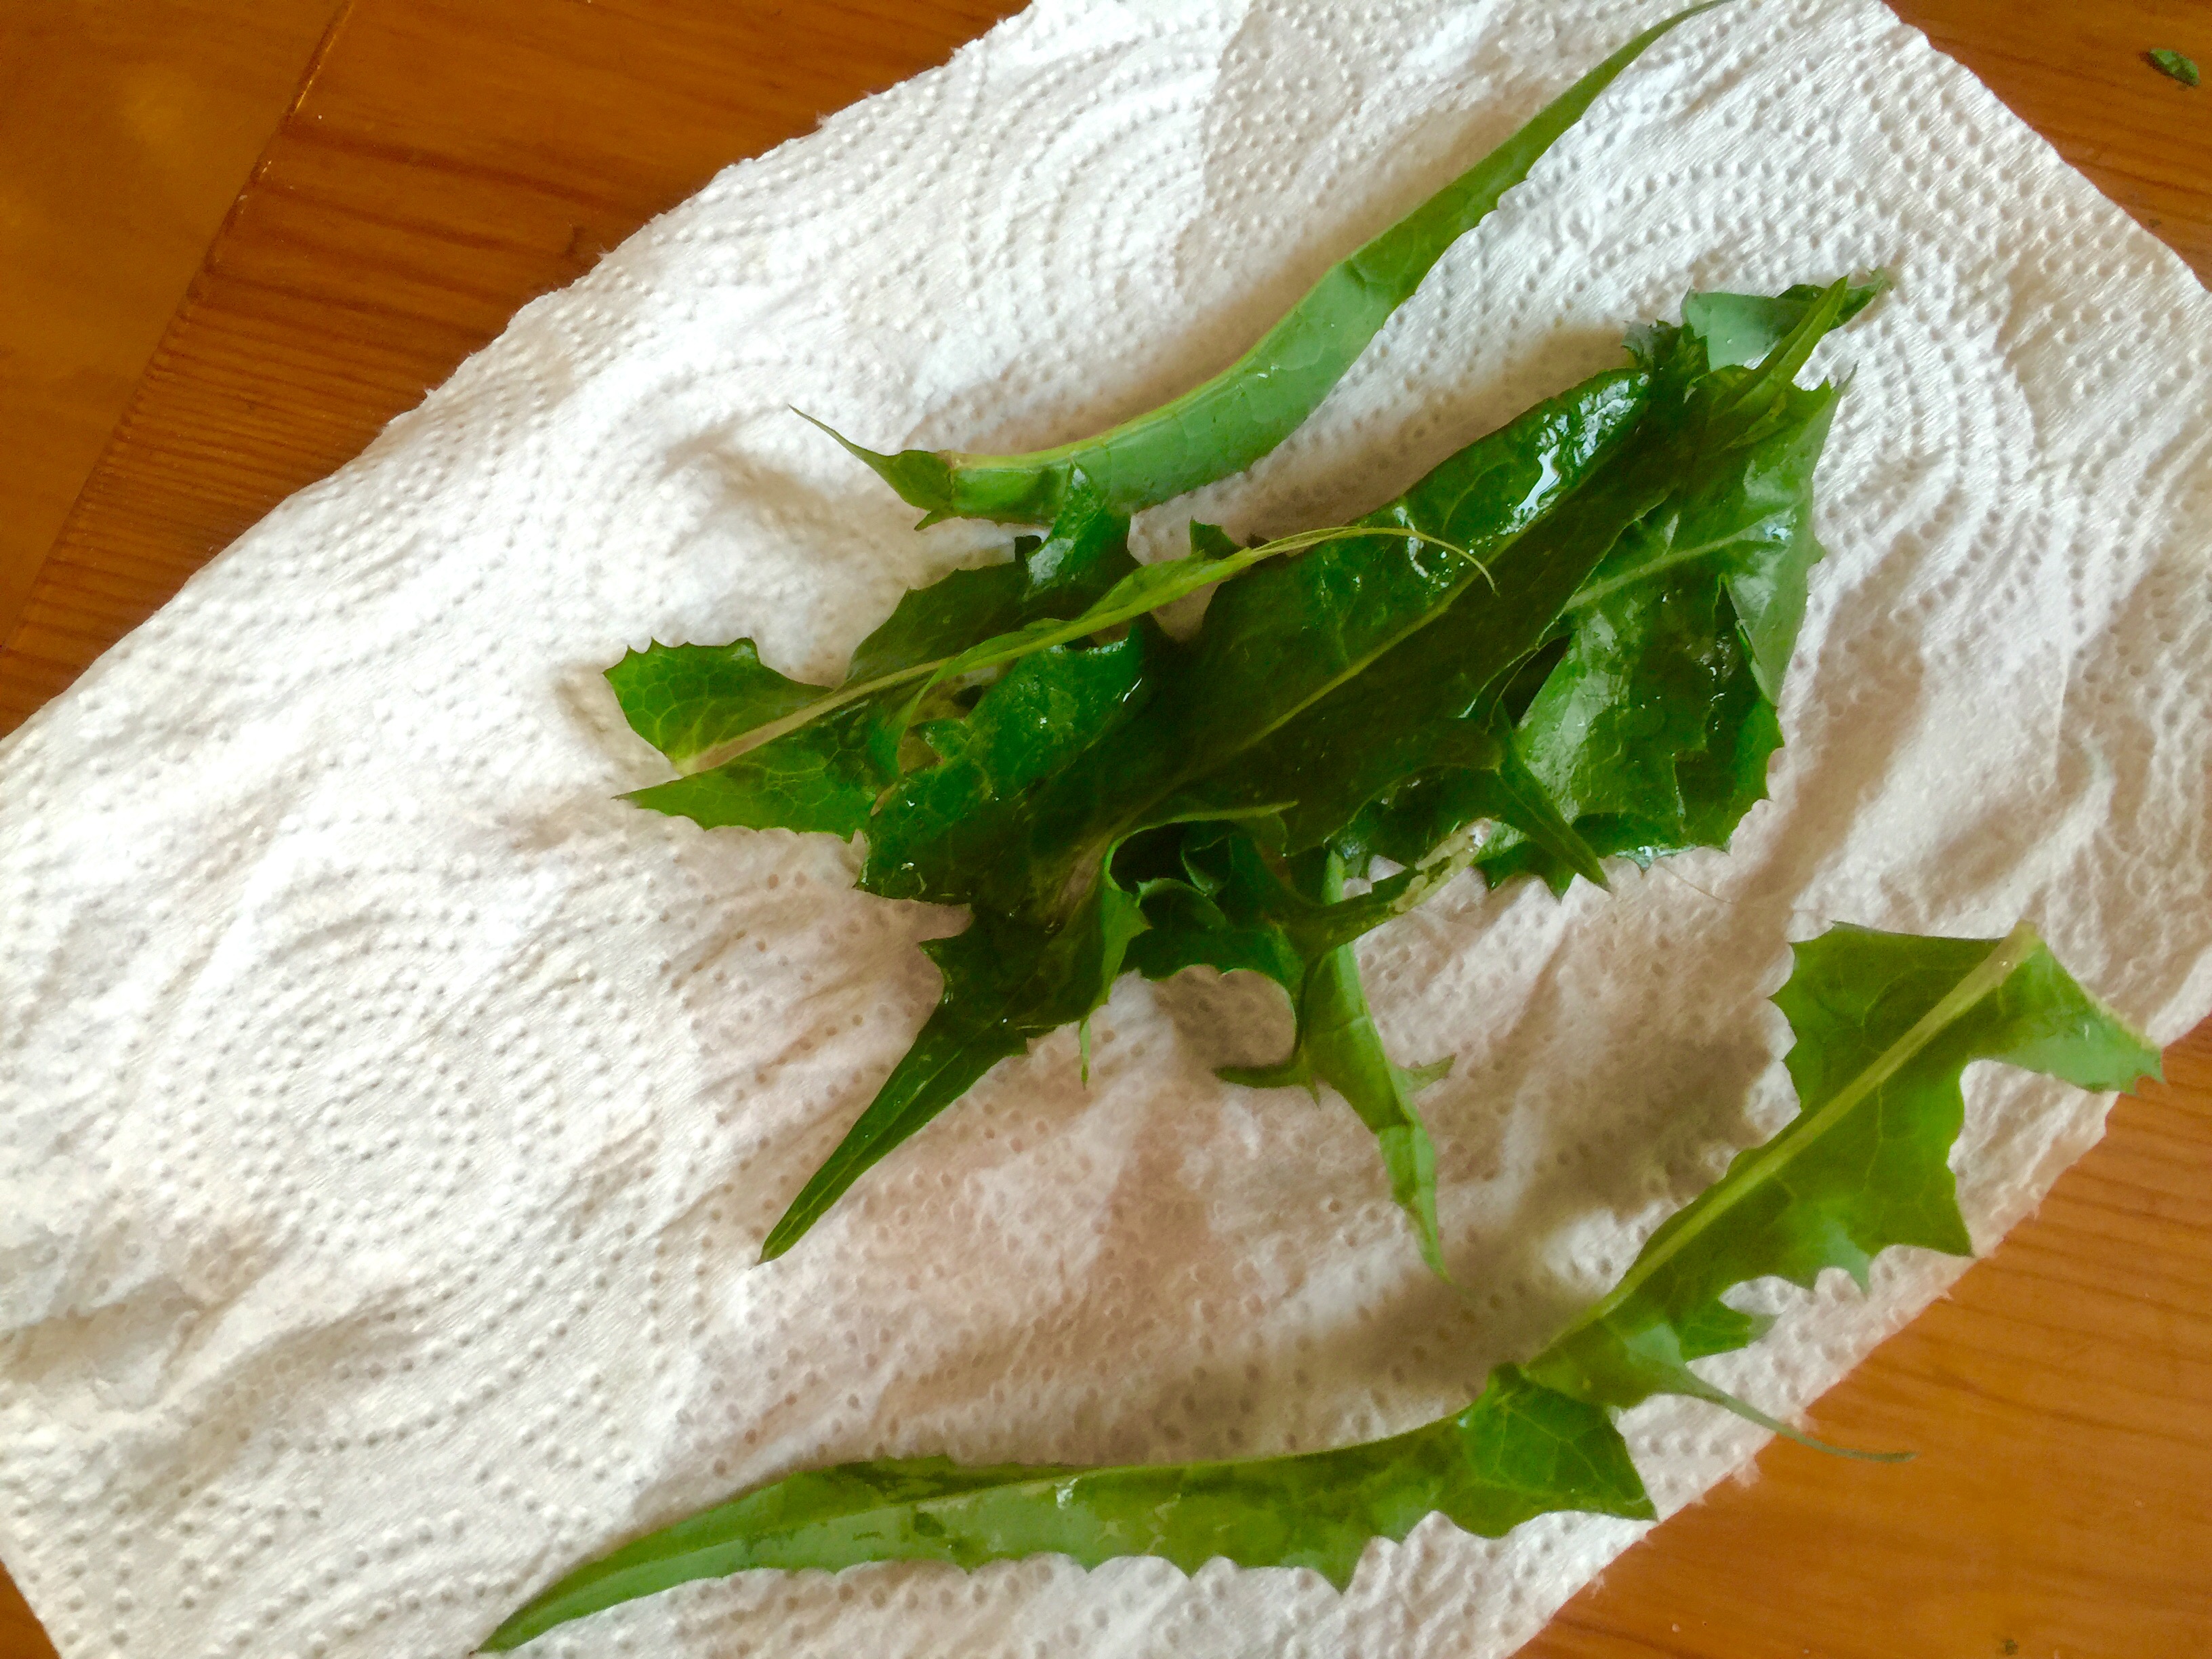 Sow thistle, picked